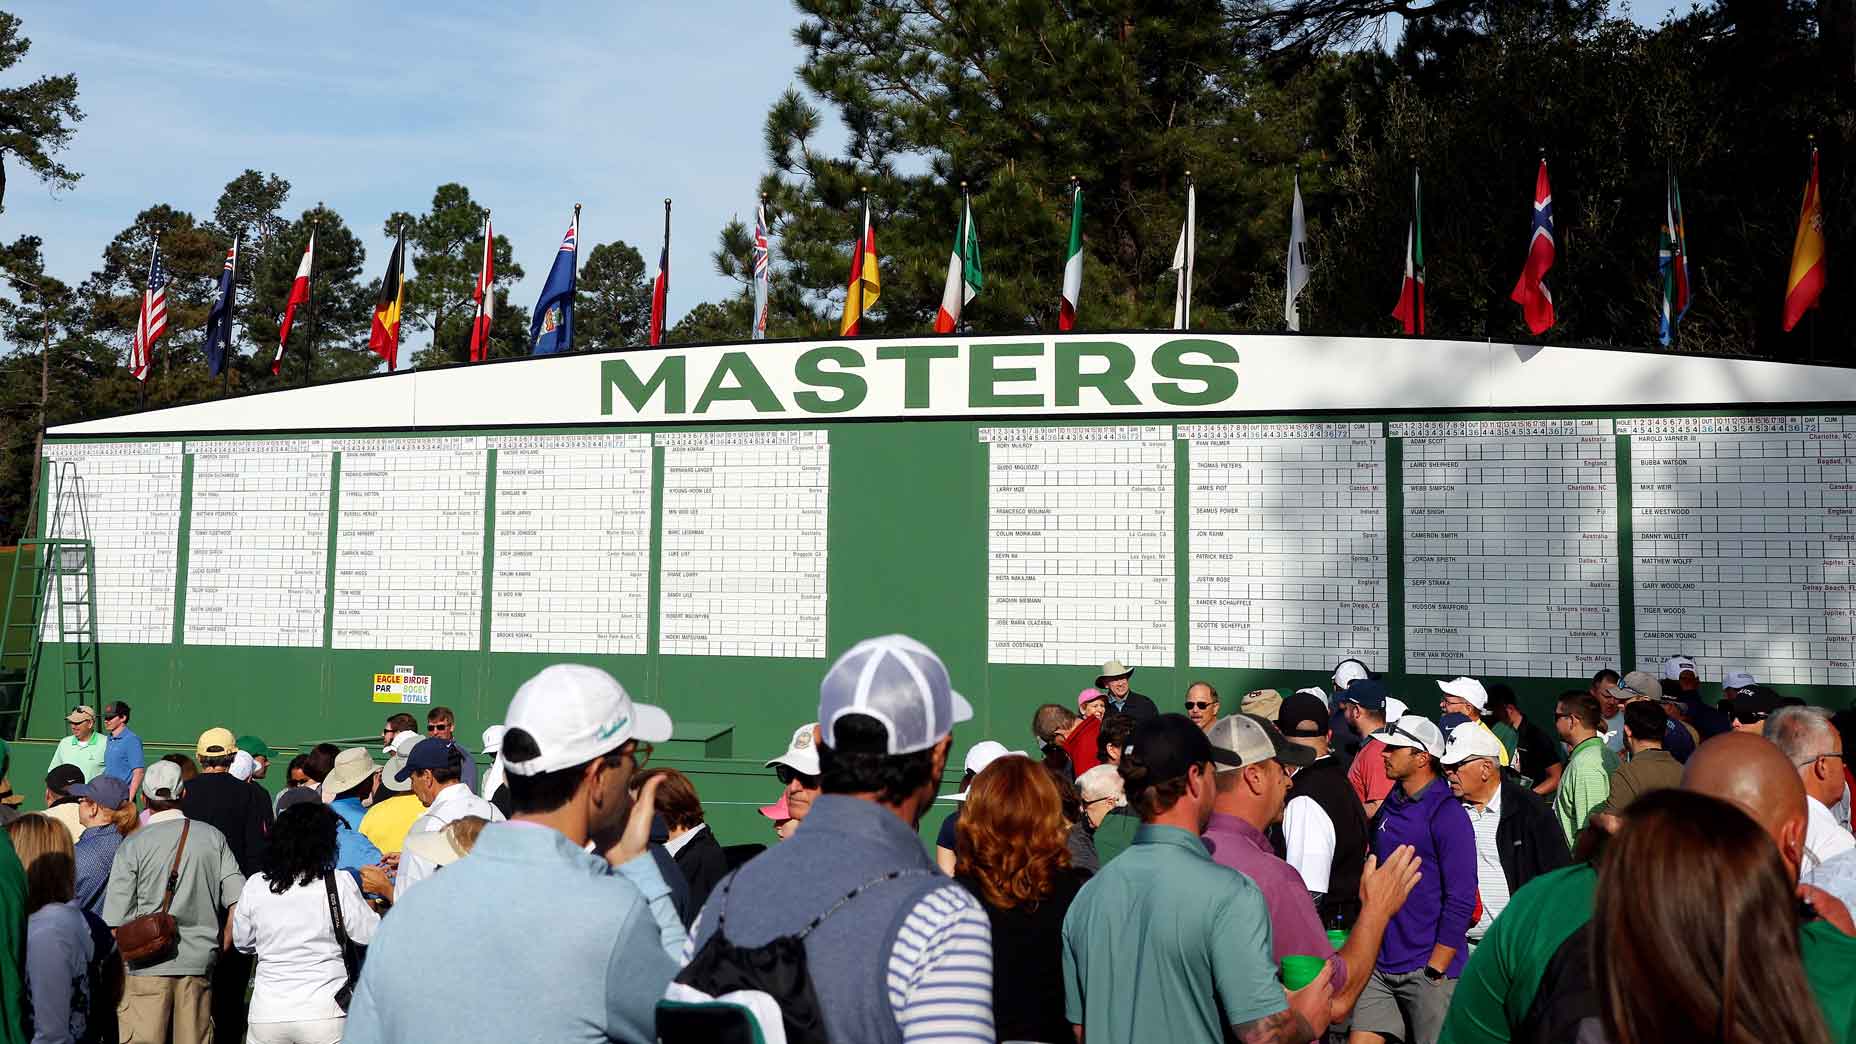 2022 Masters TV schedule: How to watch the Masters on TV